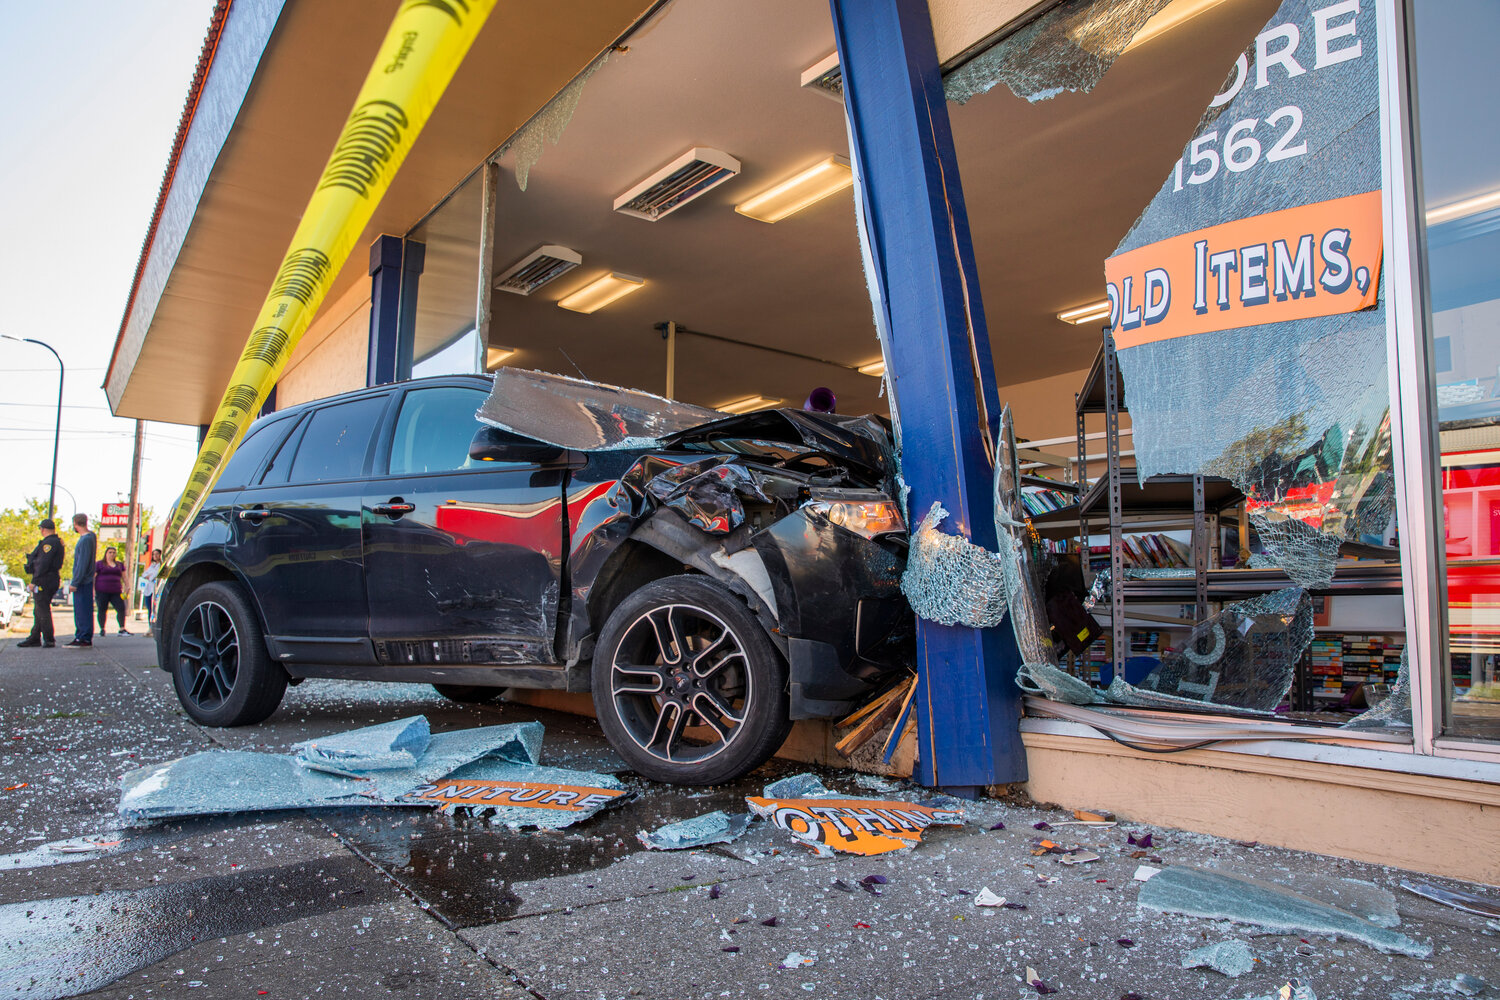 Caution tape surrounds a scene at Visiting Nurses in Centralia after a vehicle crashed through windows, destroying shelves full of items at the location Thursday morning.